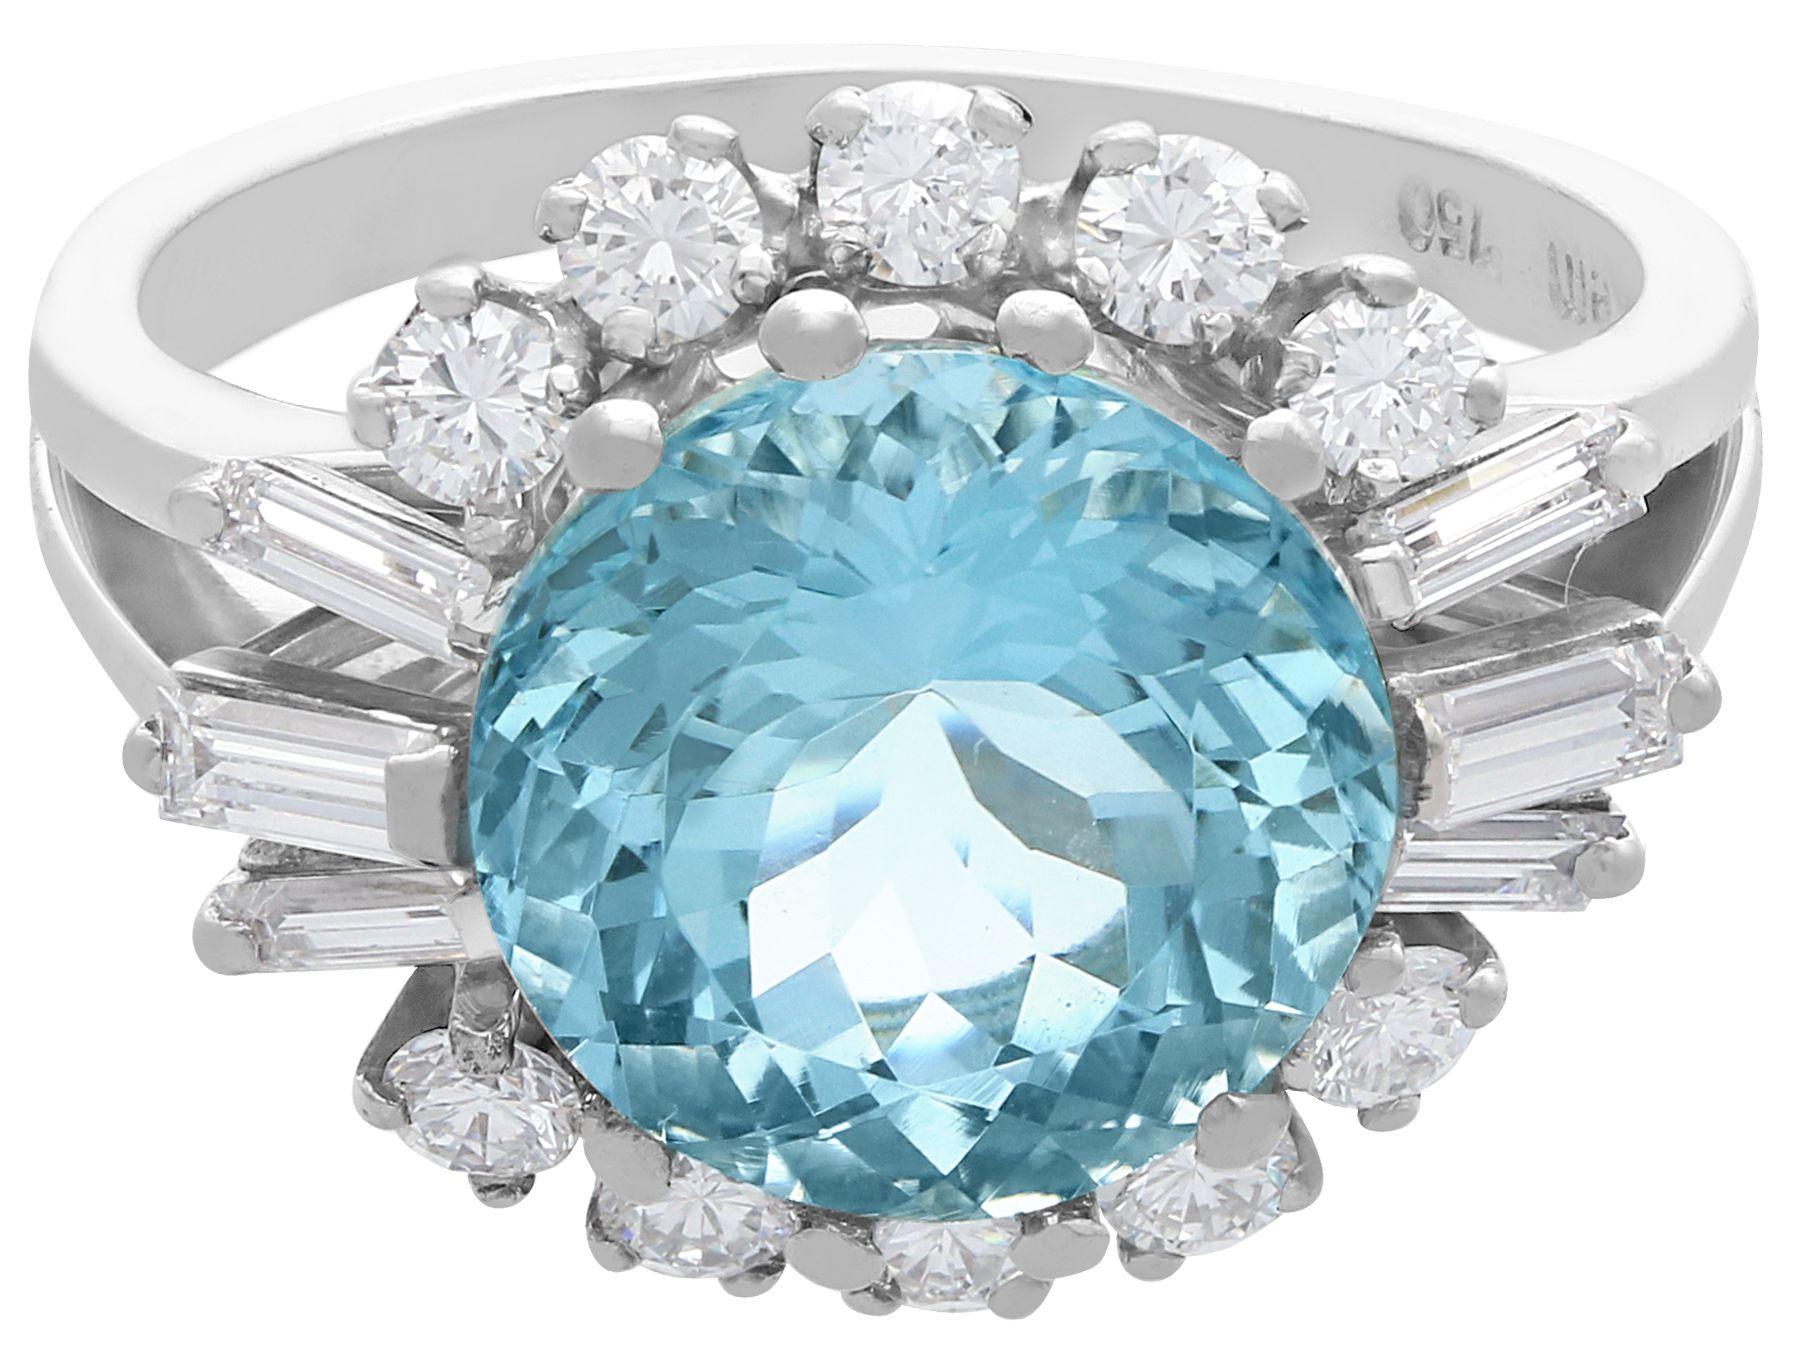 5.22 Carat Aquamarine and 1.10 Carat Diamond White Gold Cocktail Ring In Excellent Condition For Sale In Jesmond, Newcastle Upon Tyne